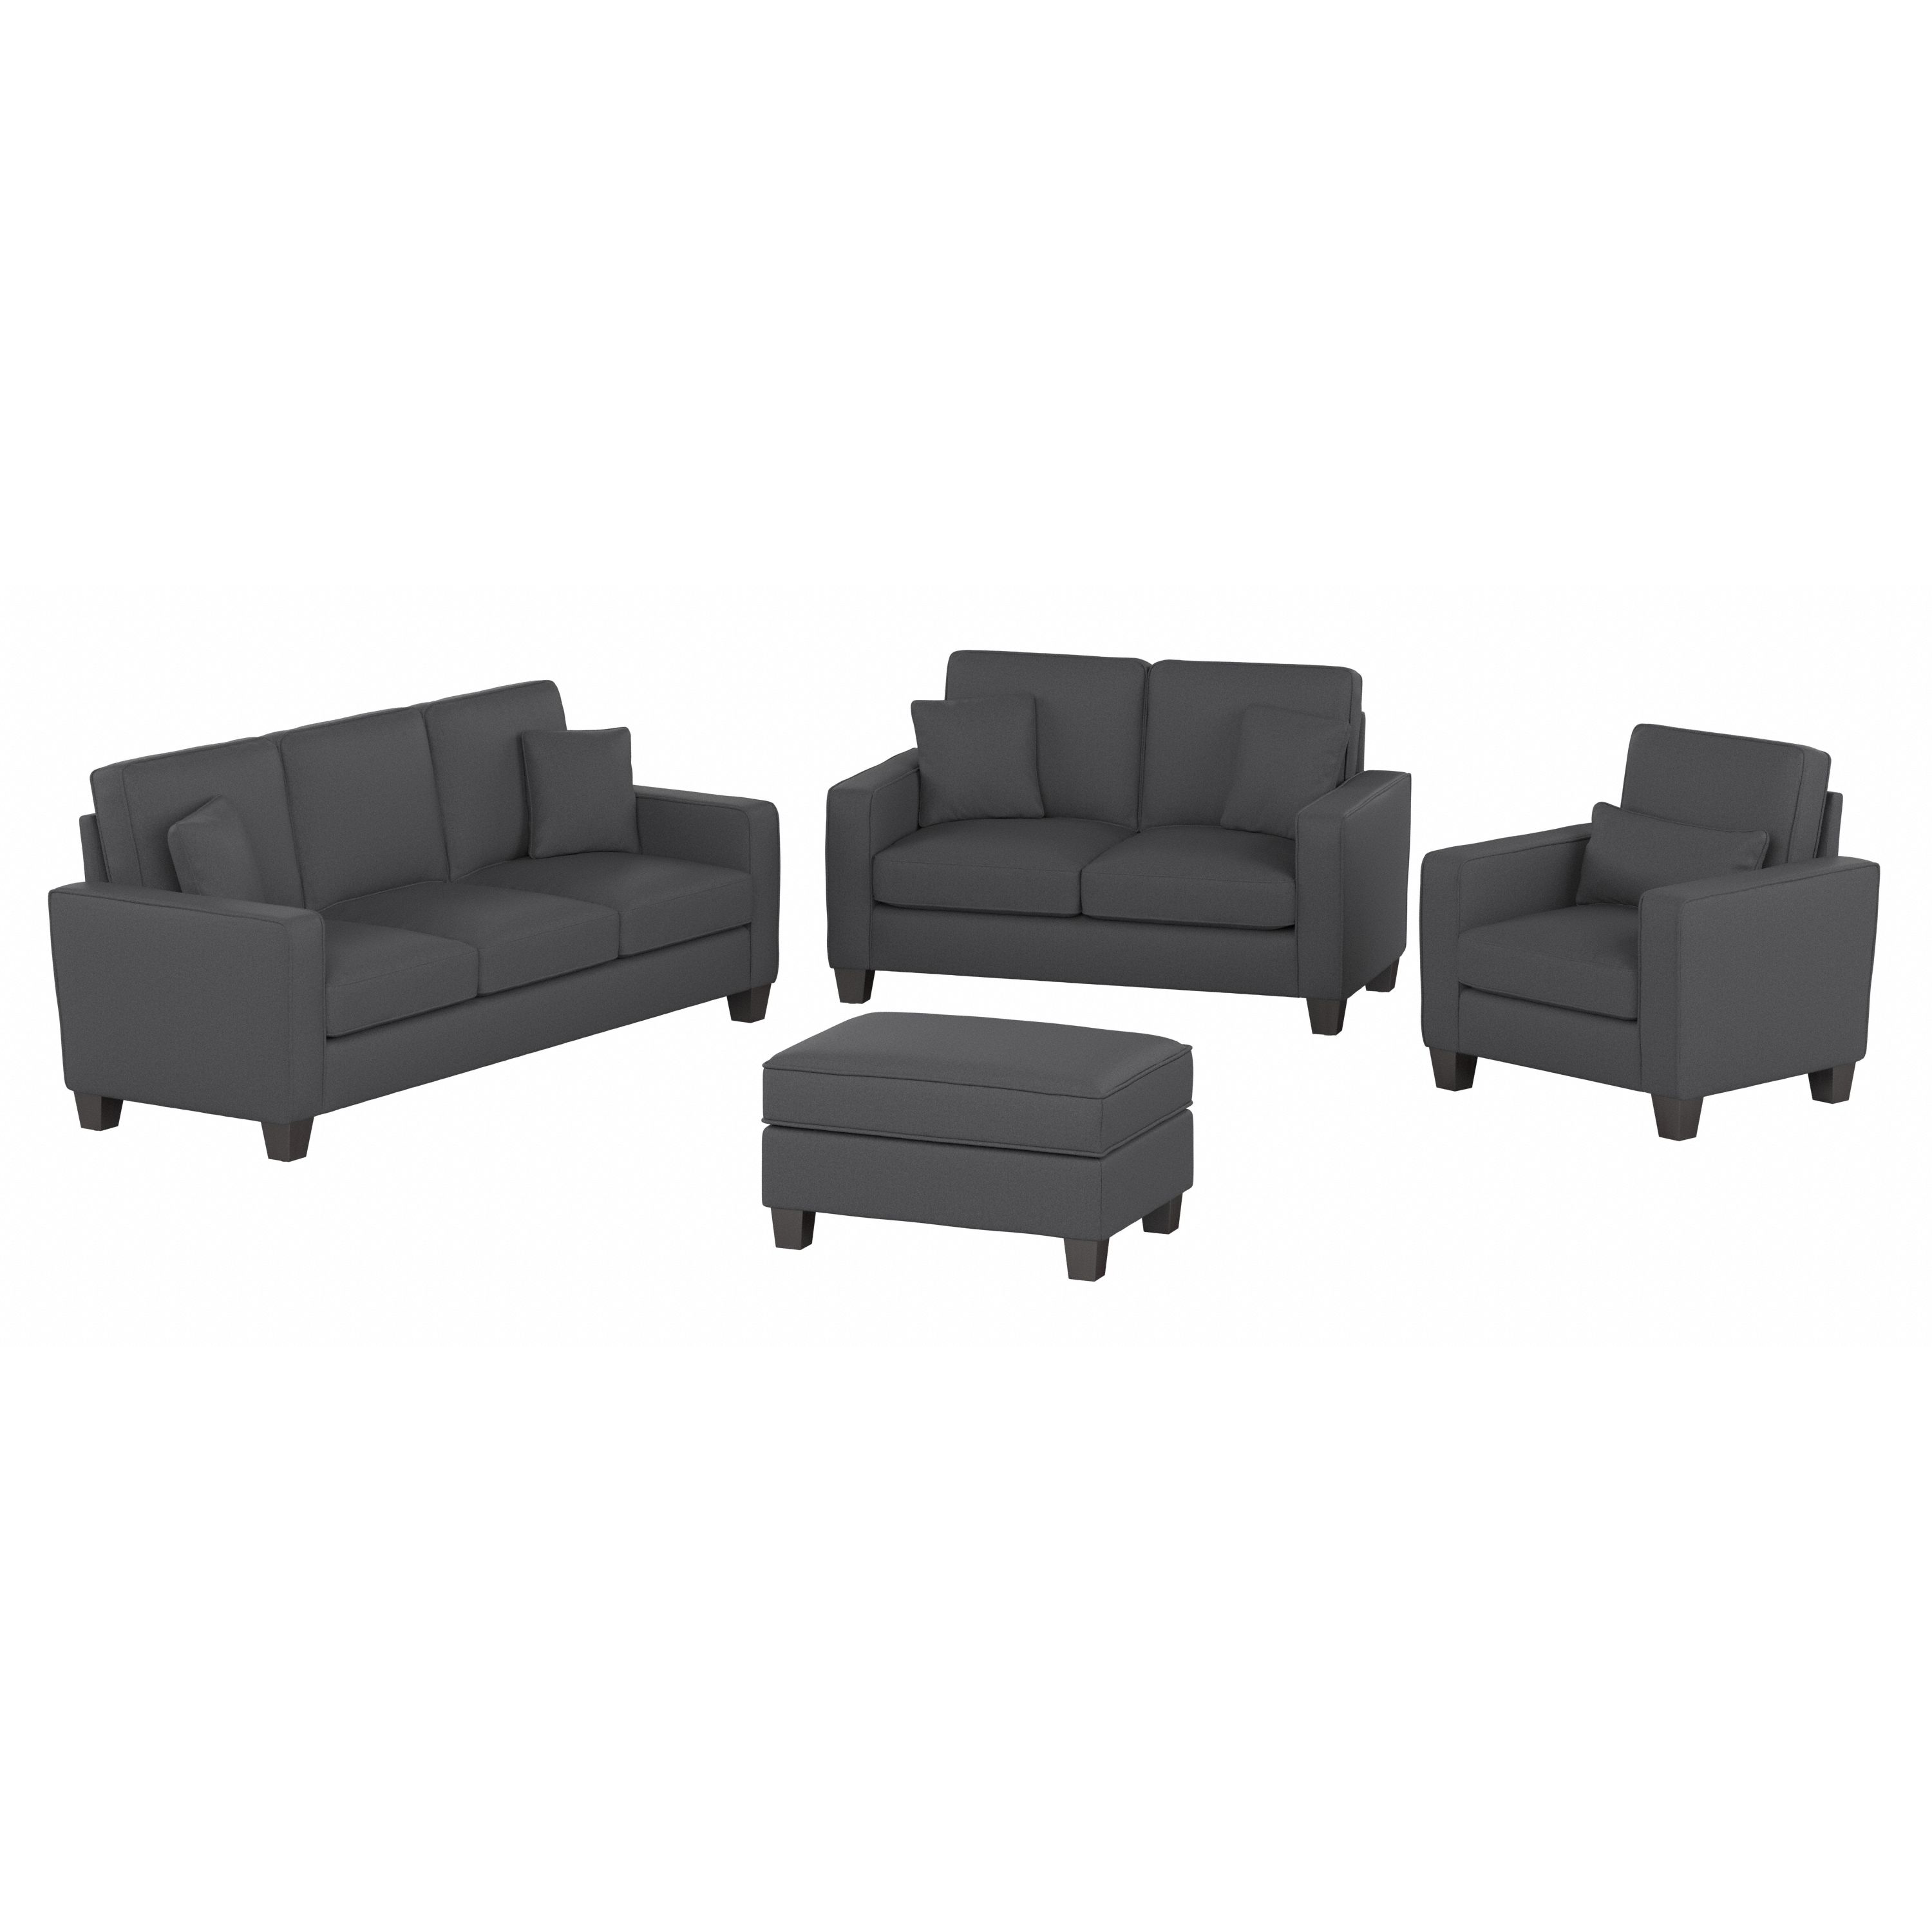 Shop Bush Furniture Stockton 85W Sofa with Loveseat, Accent Chair, and Ottoman 02 SKT020CGH #color_charcoal gray herringbone fabr